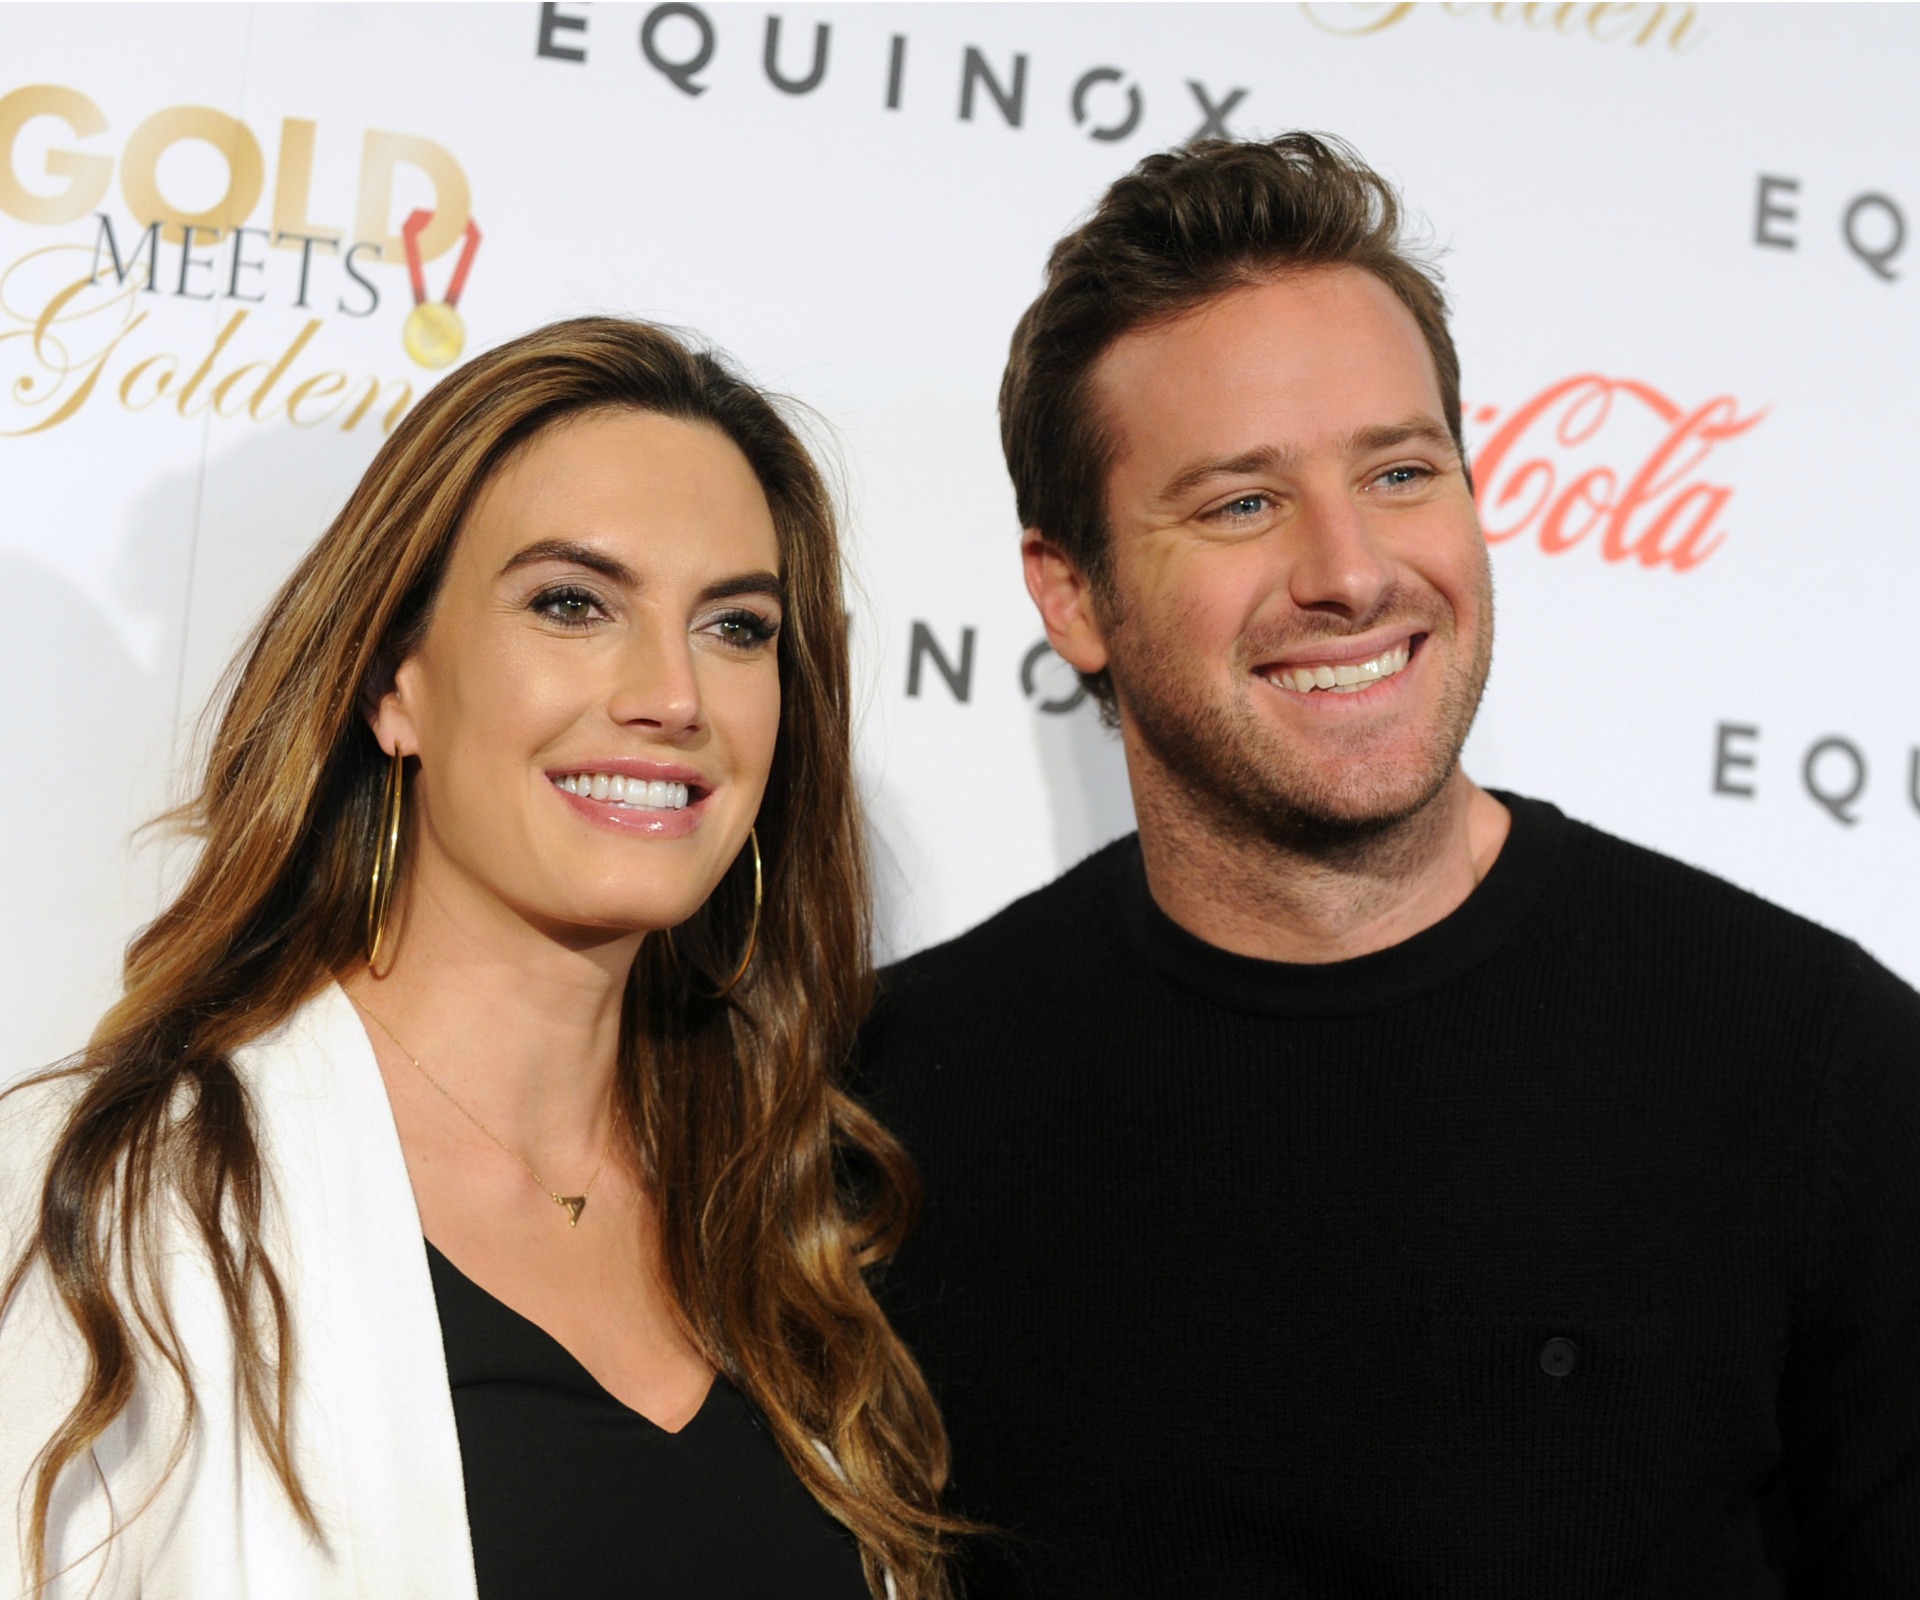 Armie Hammer and wife Elizabeth Chambers Hammer welcome a son!